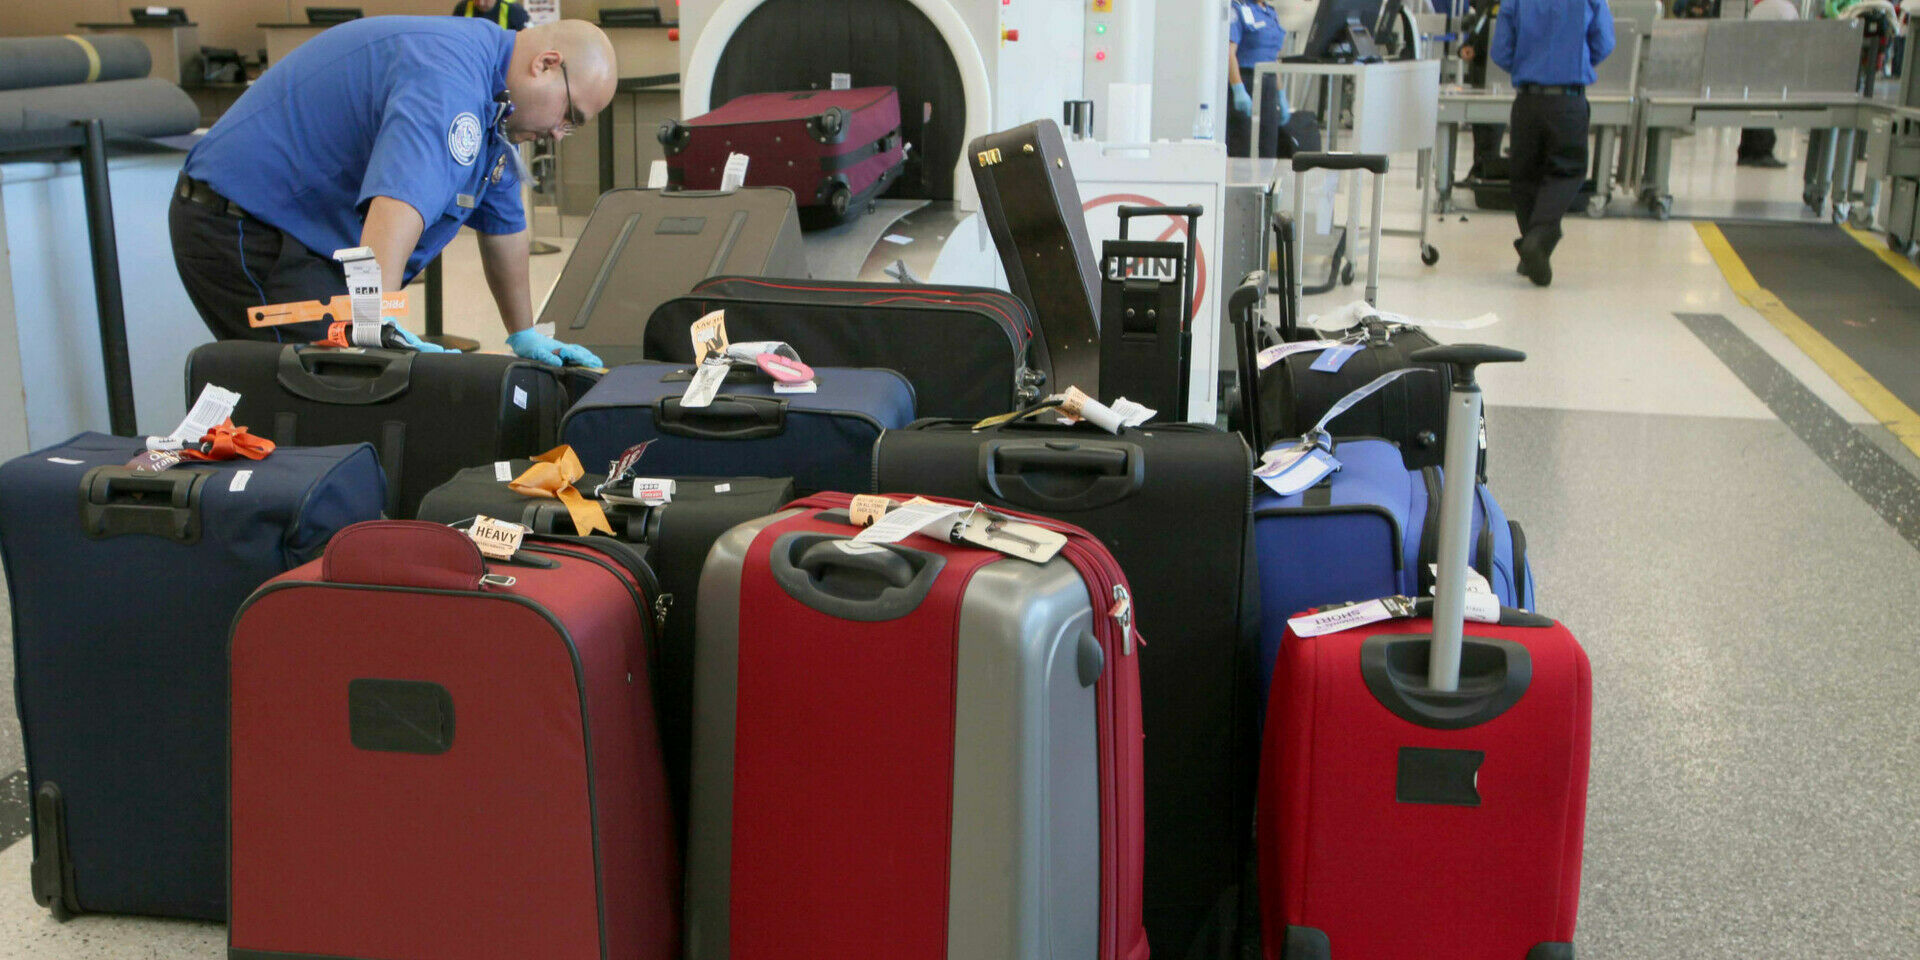 Echoes of the crisis: air passengers around the world complain about missing luggage and bad service